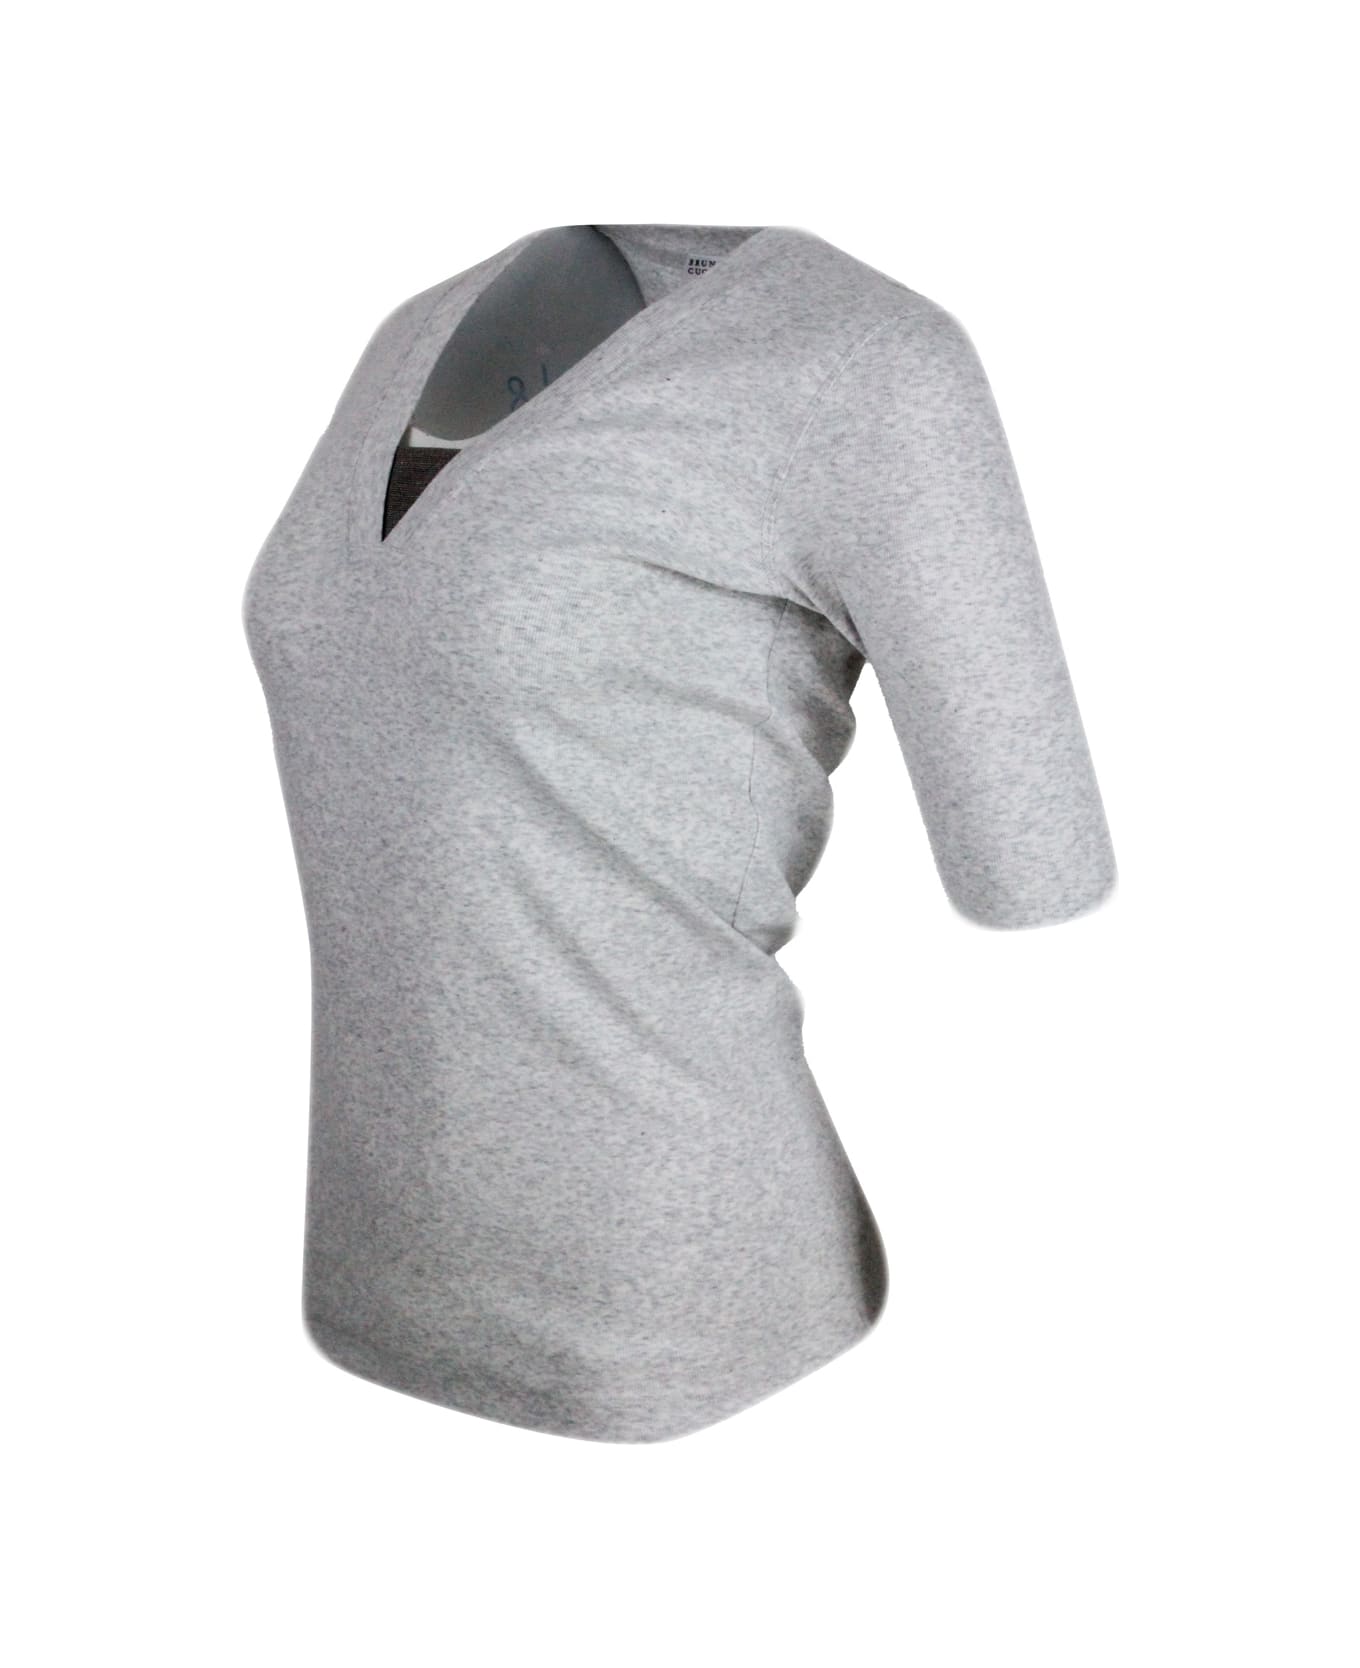 Brunello Cucinelli Long-sleeved V-neck T-shirt In Ribbed Stretch Cotton With Monili Triangle On The Neckline - Grey